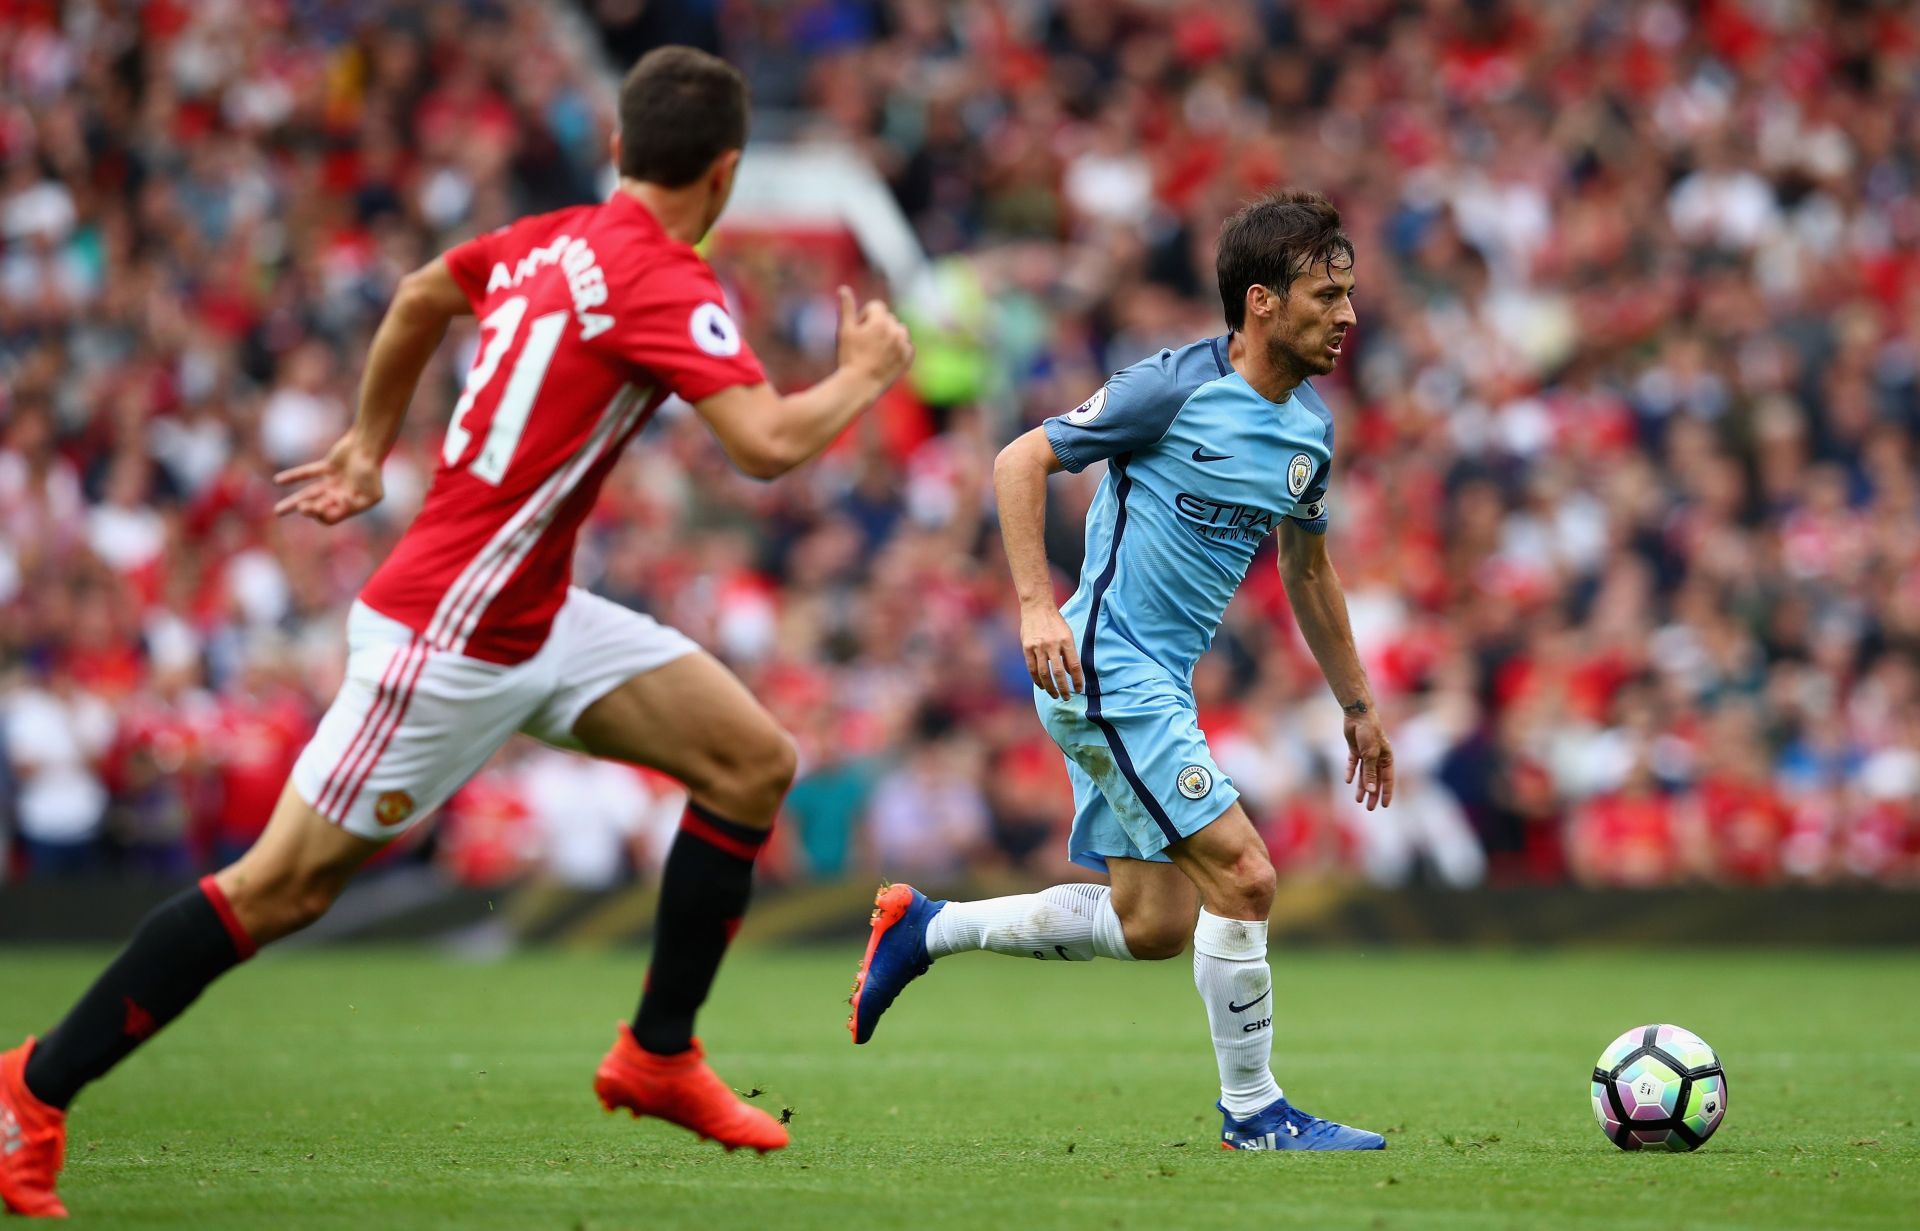 David Silva more often than not performed really well against Manchester United